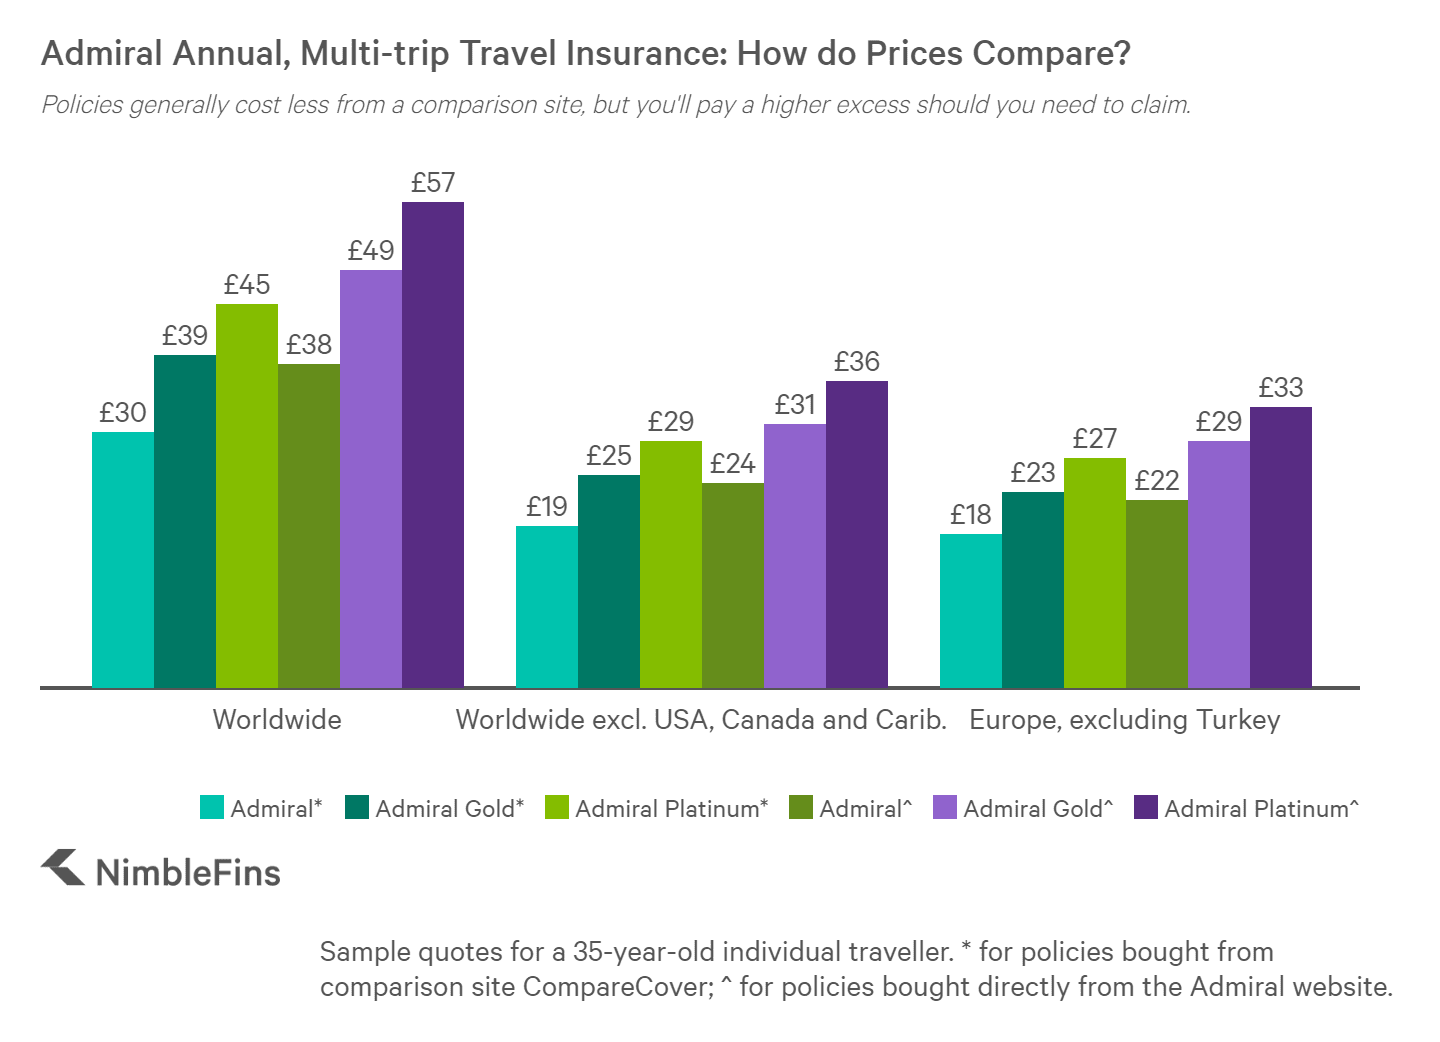 chart showing Admiral multi-trip travel insurance prices compared to market averages